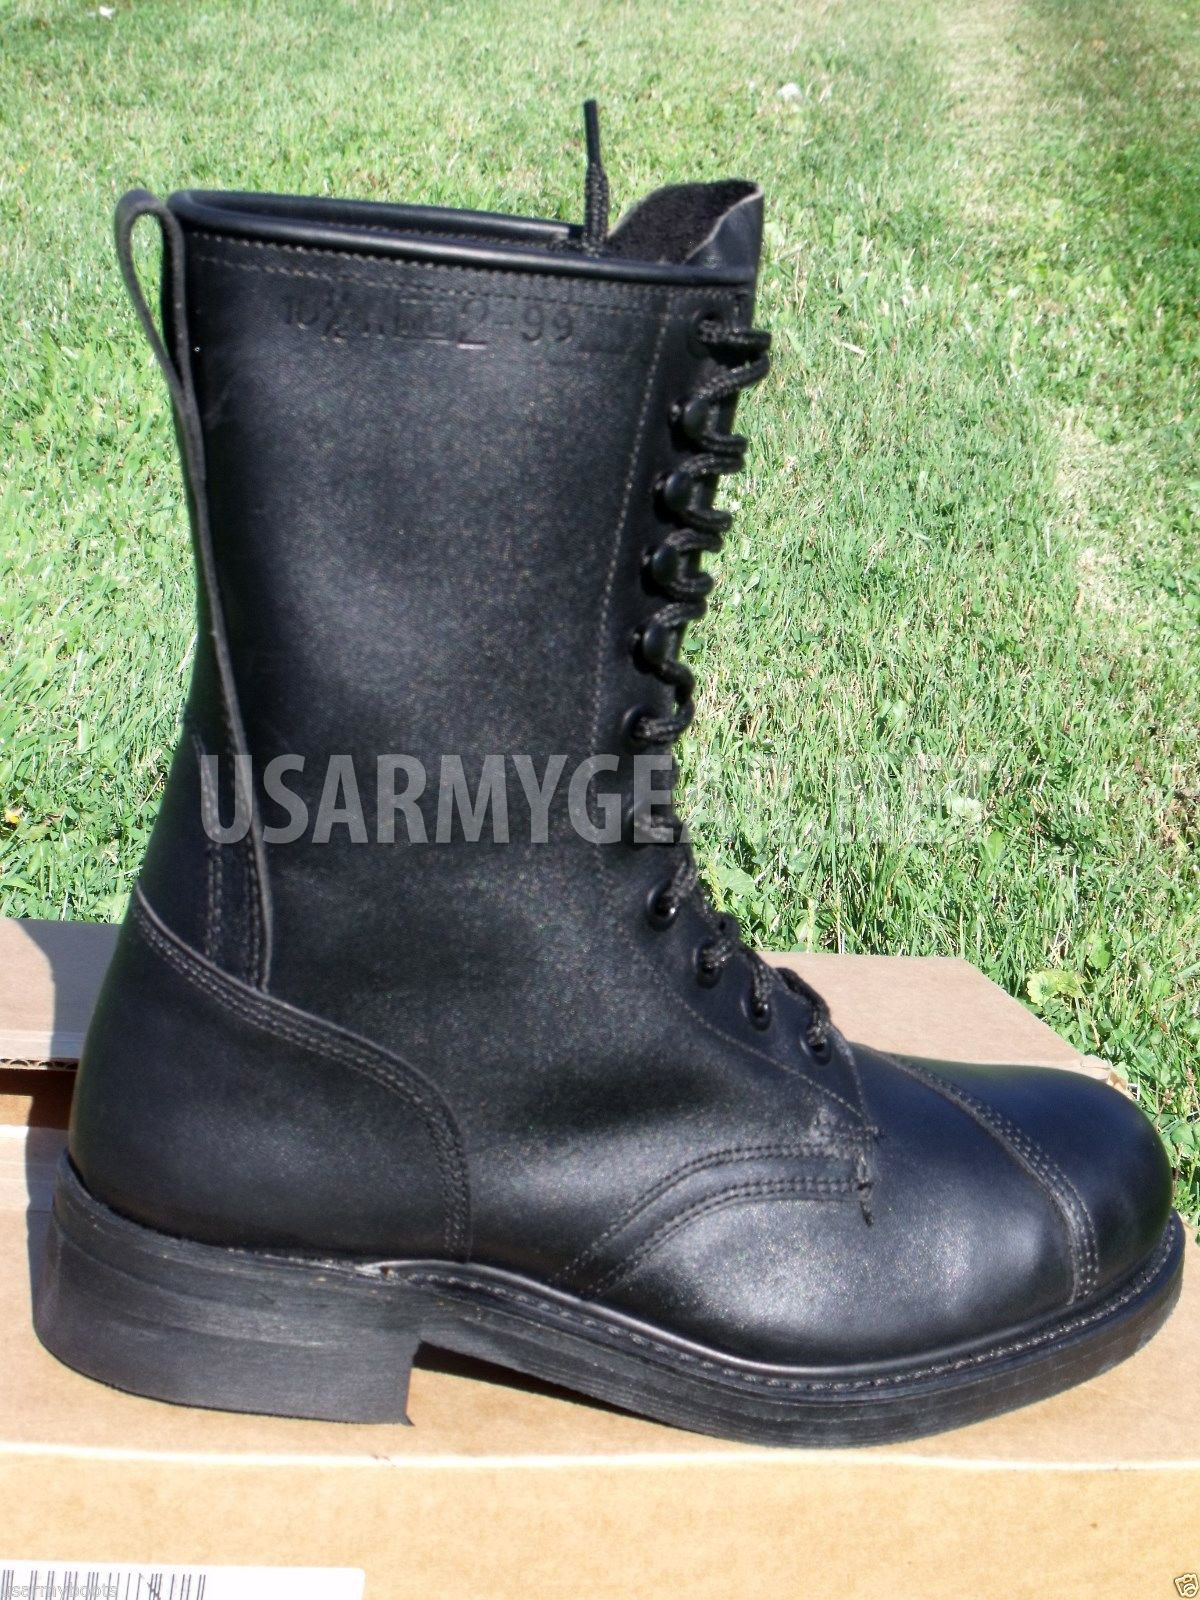 New Black Leather Steel Toe Motorcycle Combat US Military Safety Biker's Boots